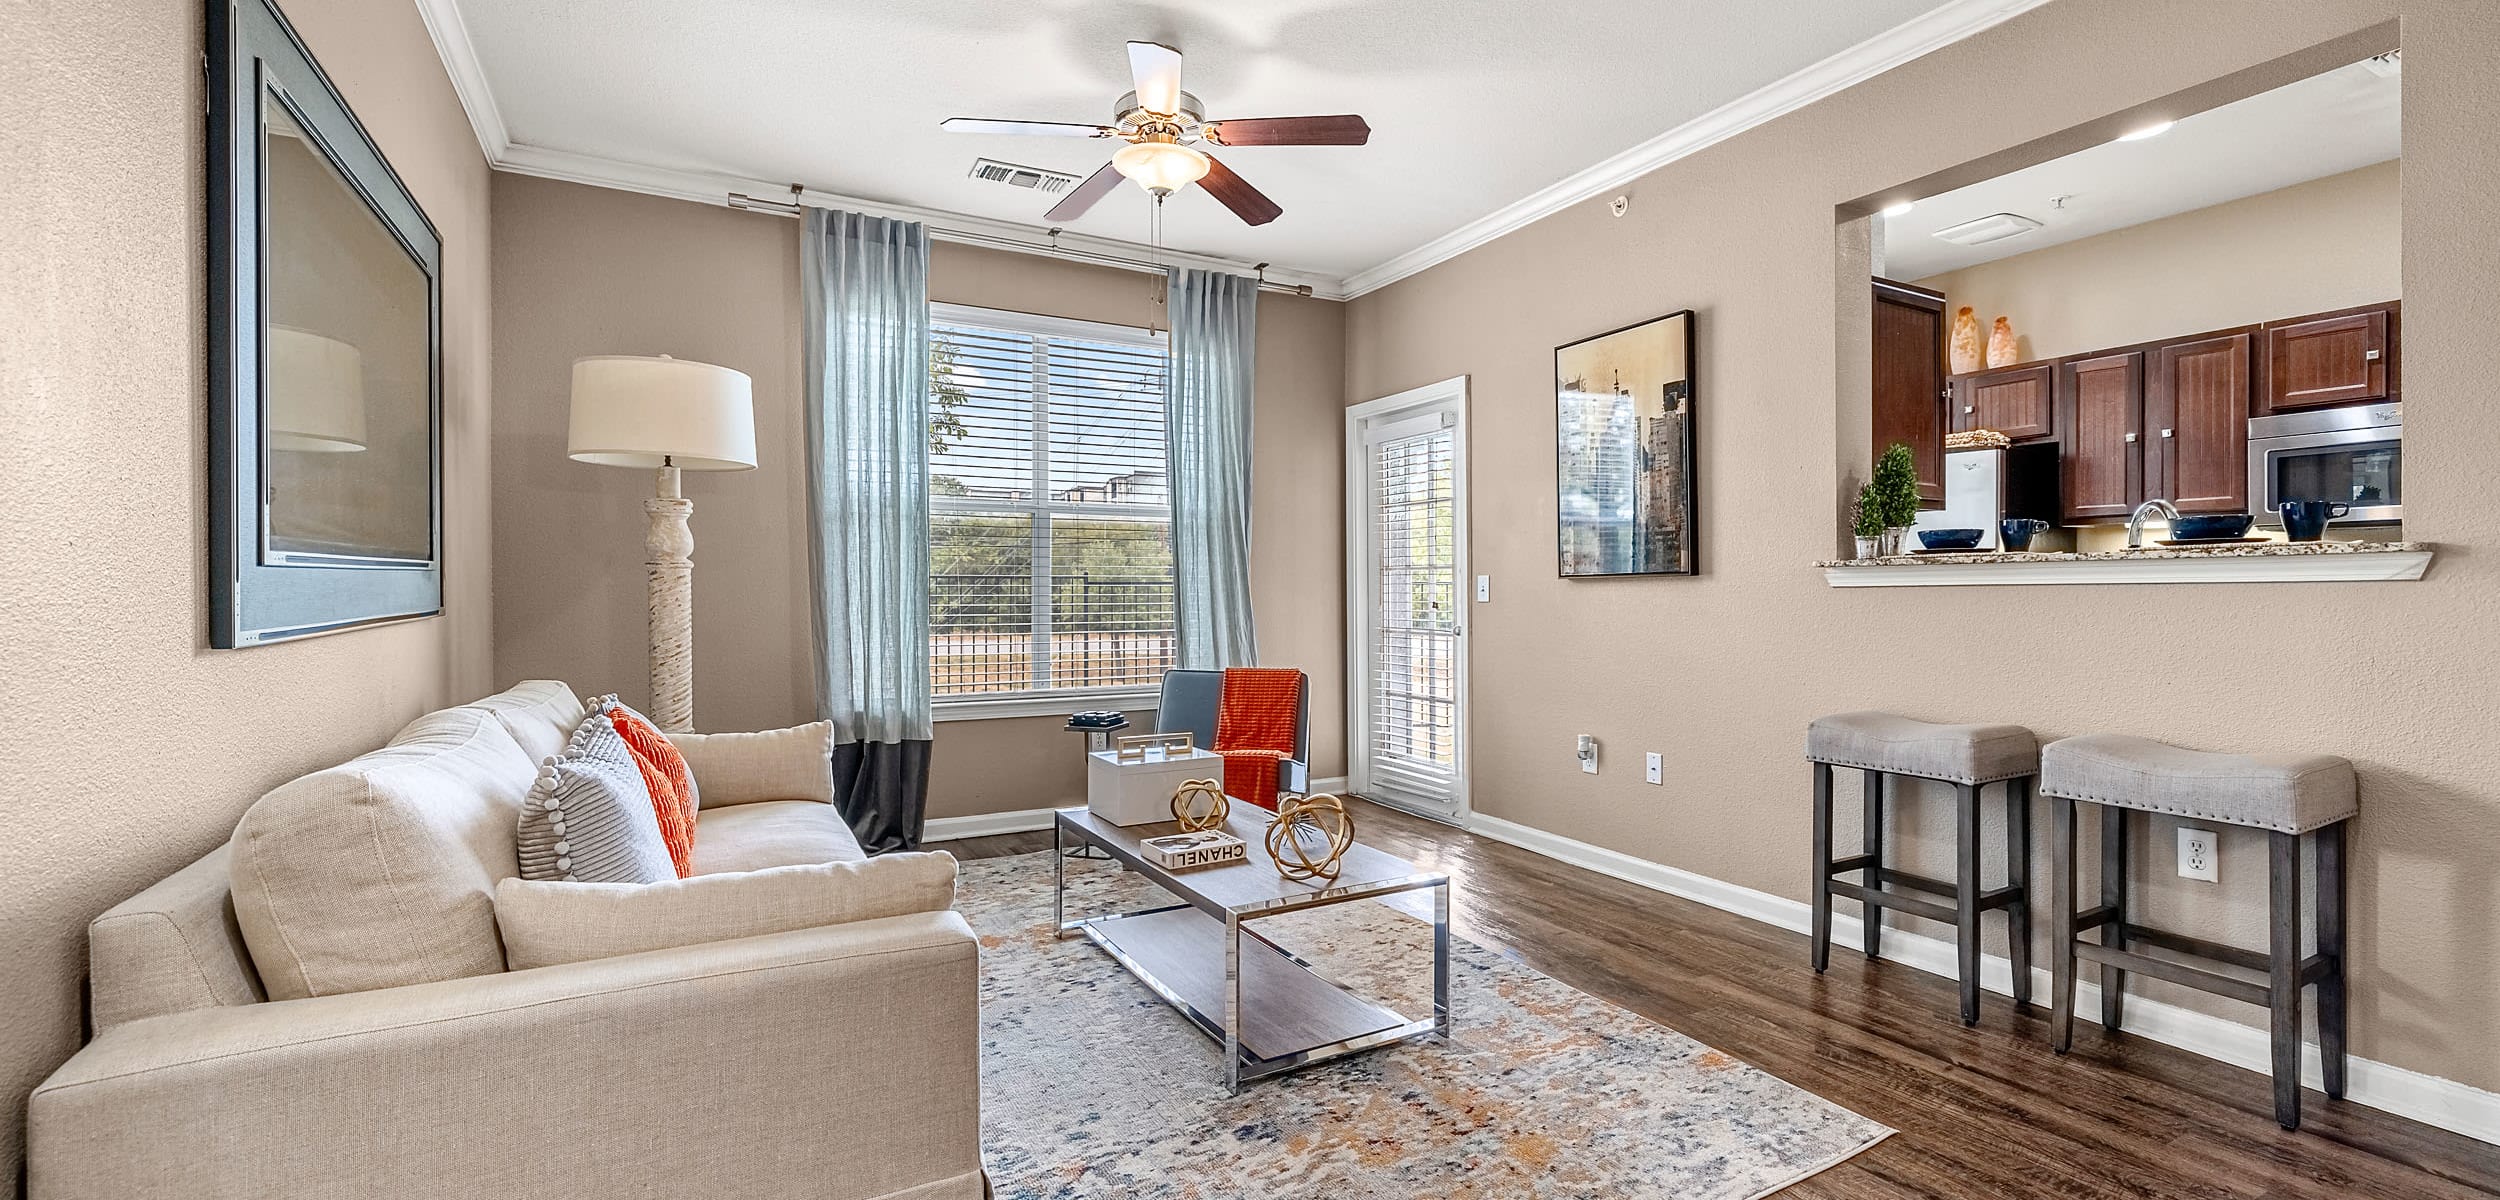 Open and bright living area with wood floors and a large rug at Marquis at Crown Ridge in San Antonio, Texas